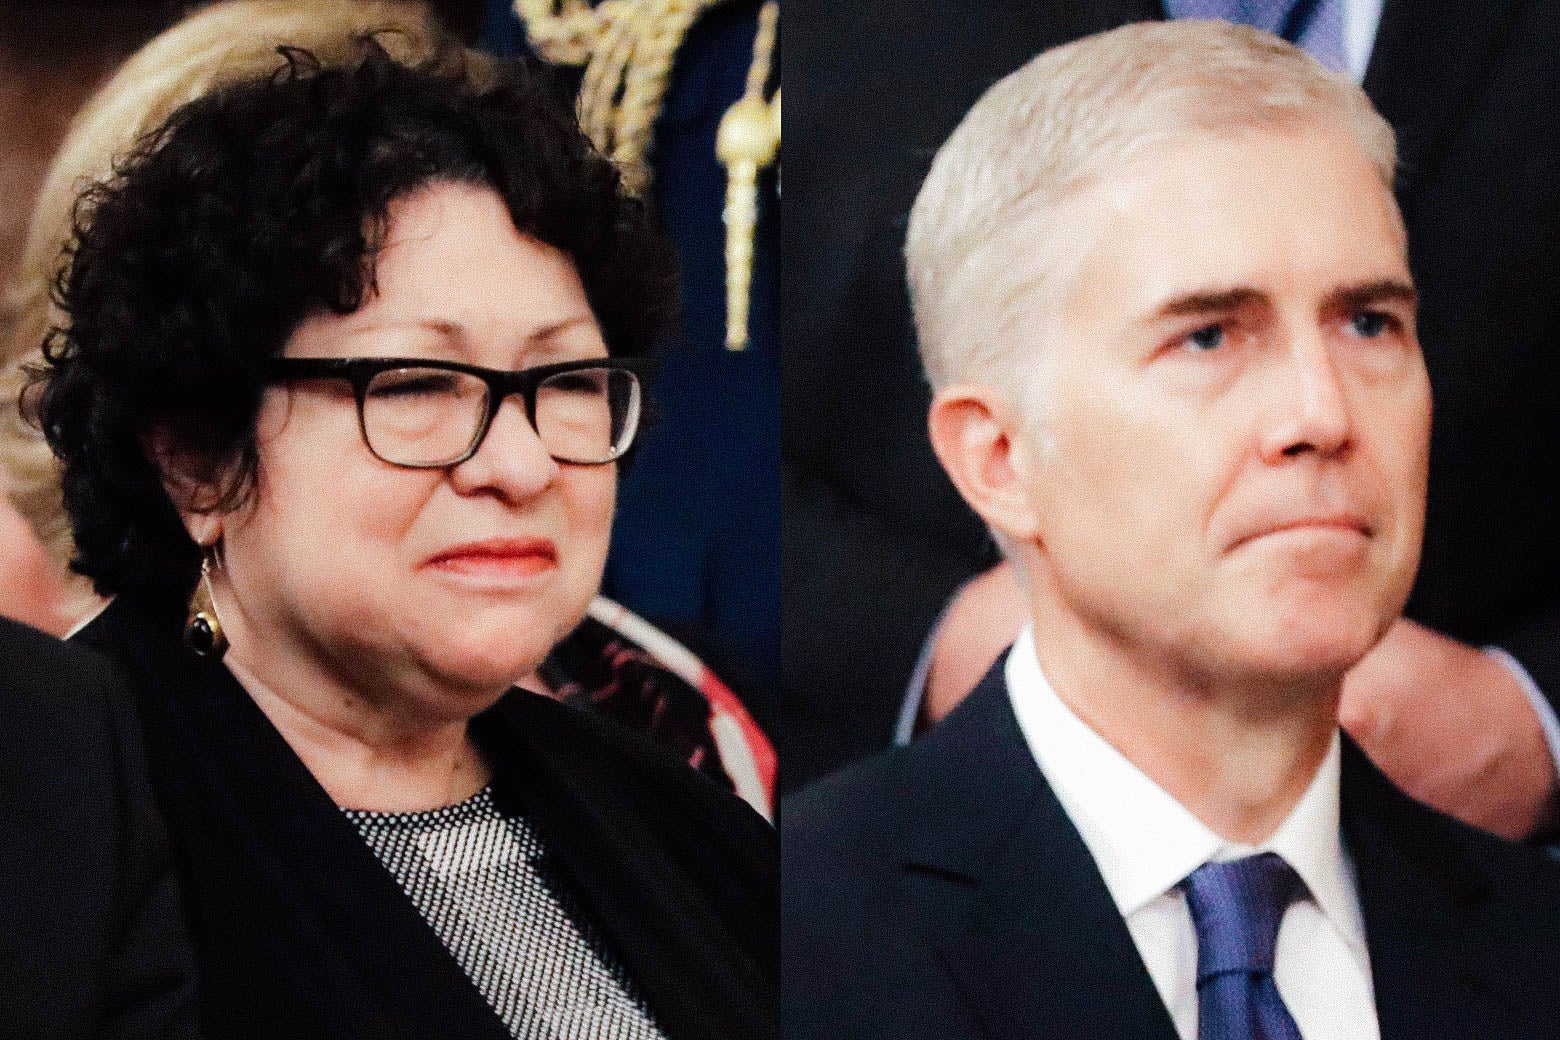 Side by side images of Supreme Court Justices Sonia Sotomayor and Neil Gorsuch.